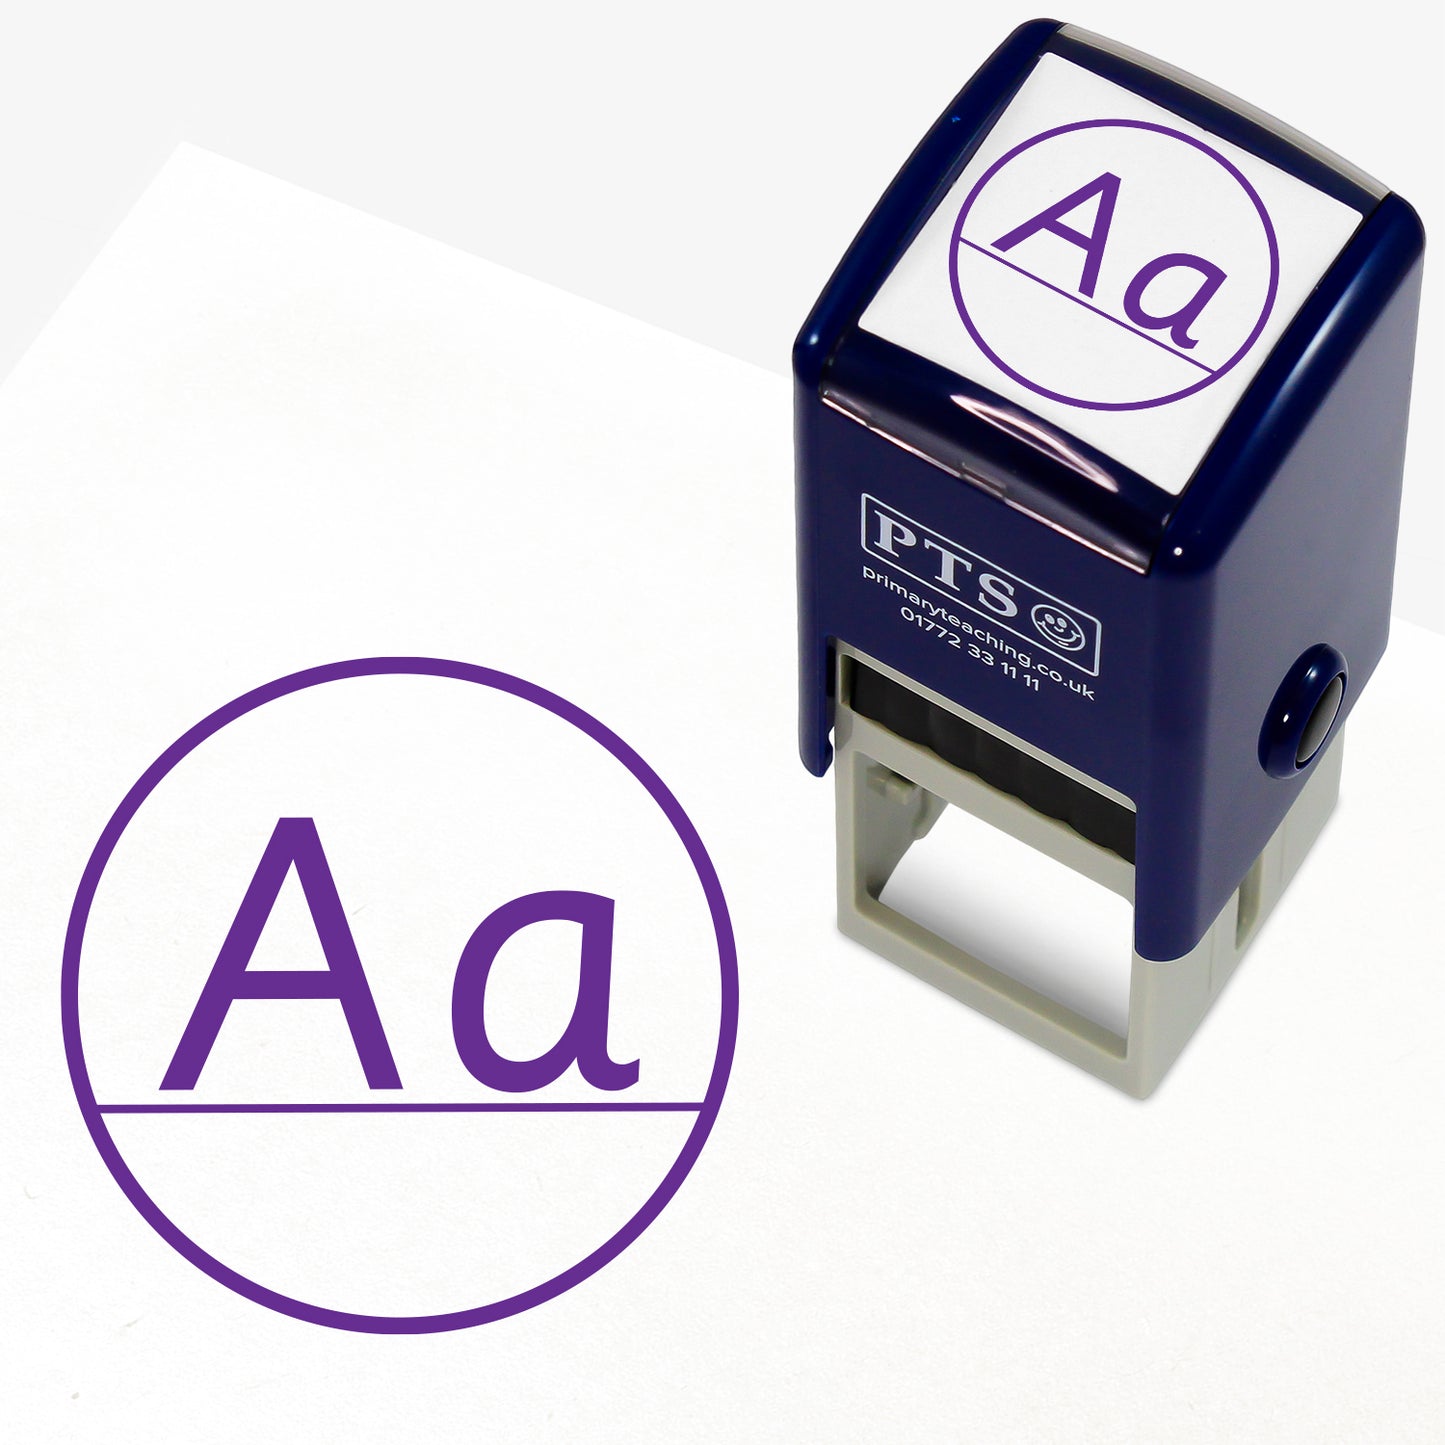 Aa Capital/Lower Case Stamper - 25mm